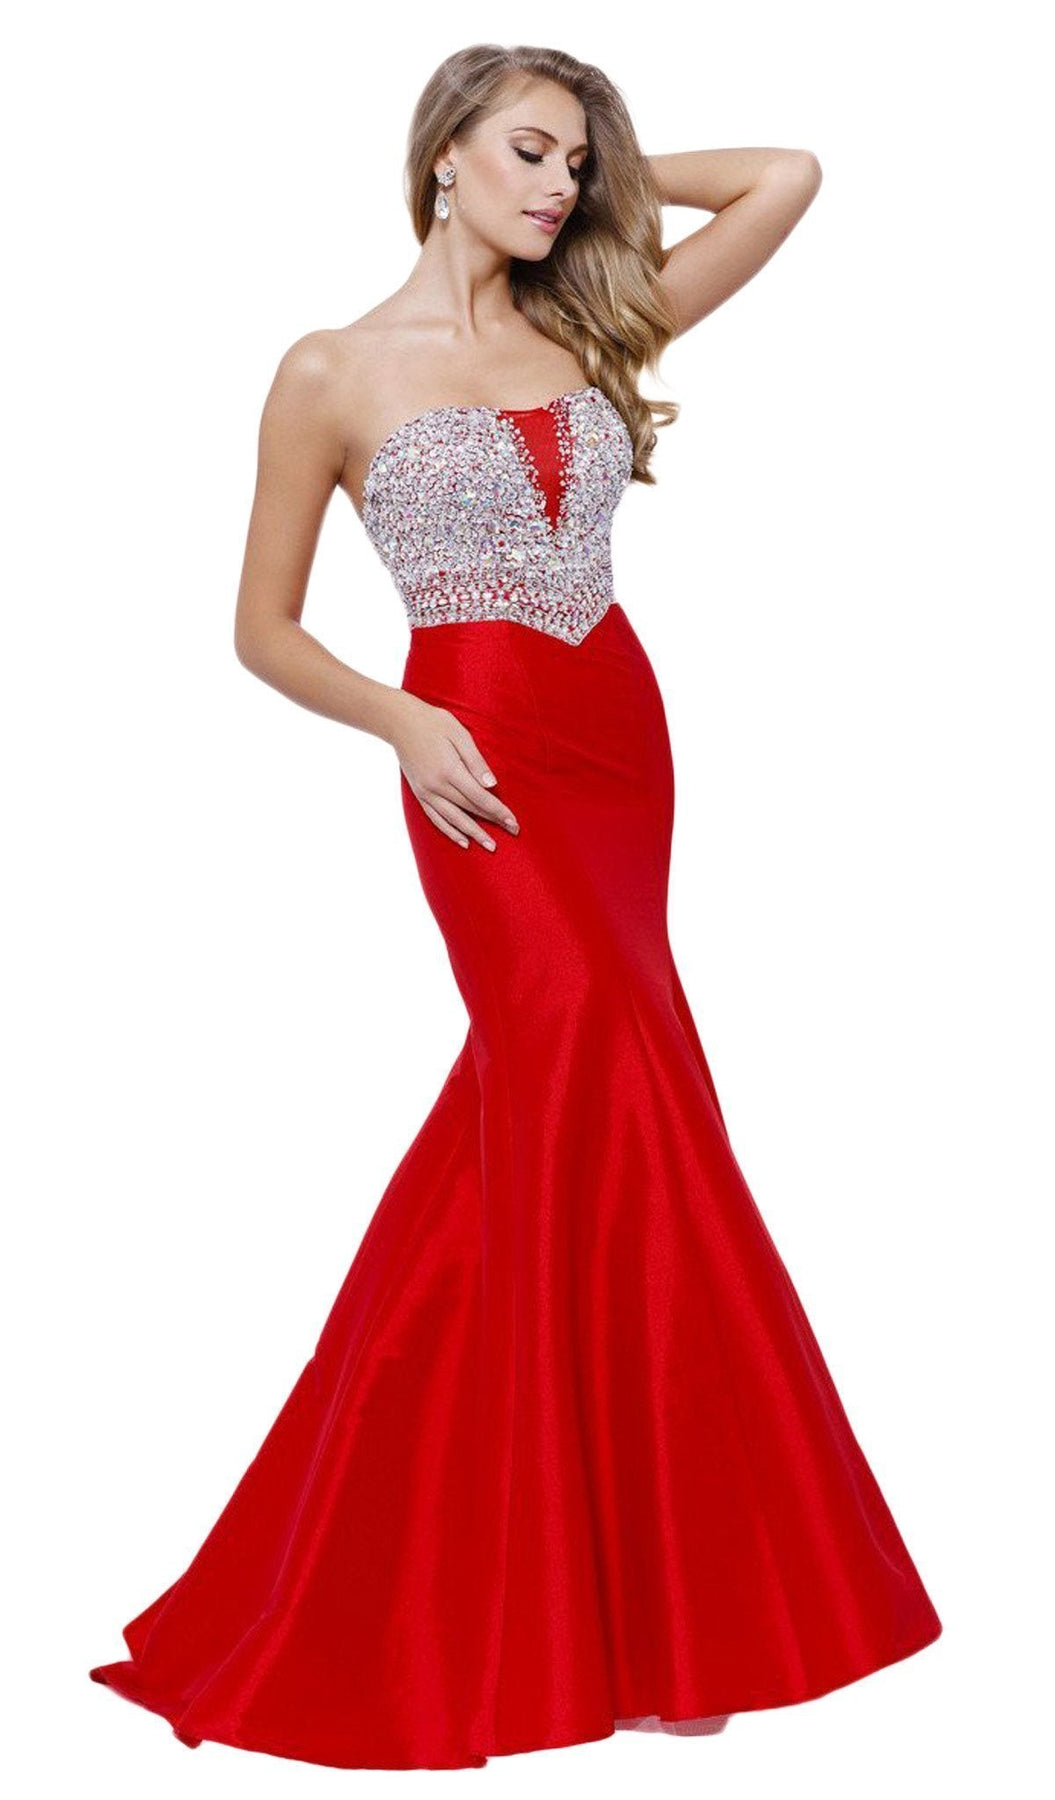 Nox Anabel - 8243 Strapless Sparkling Sequined Mermaid Dress Special Occasion Dress XS / Red